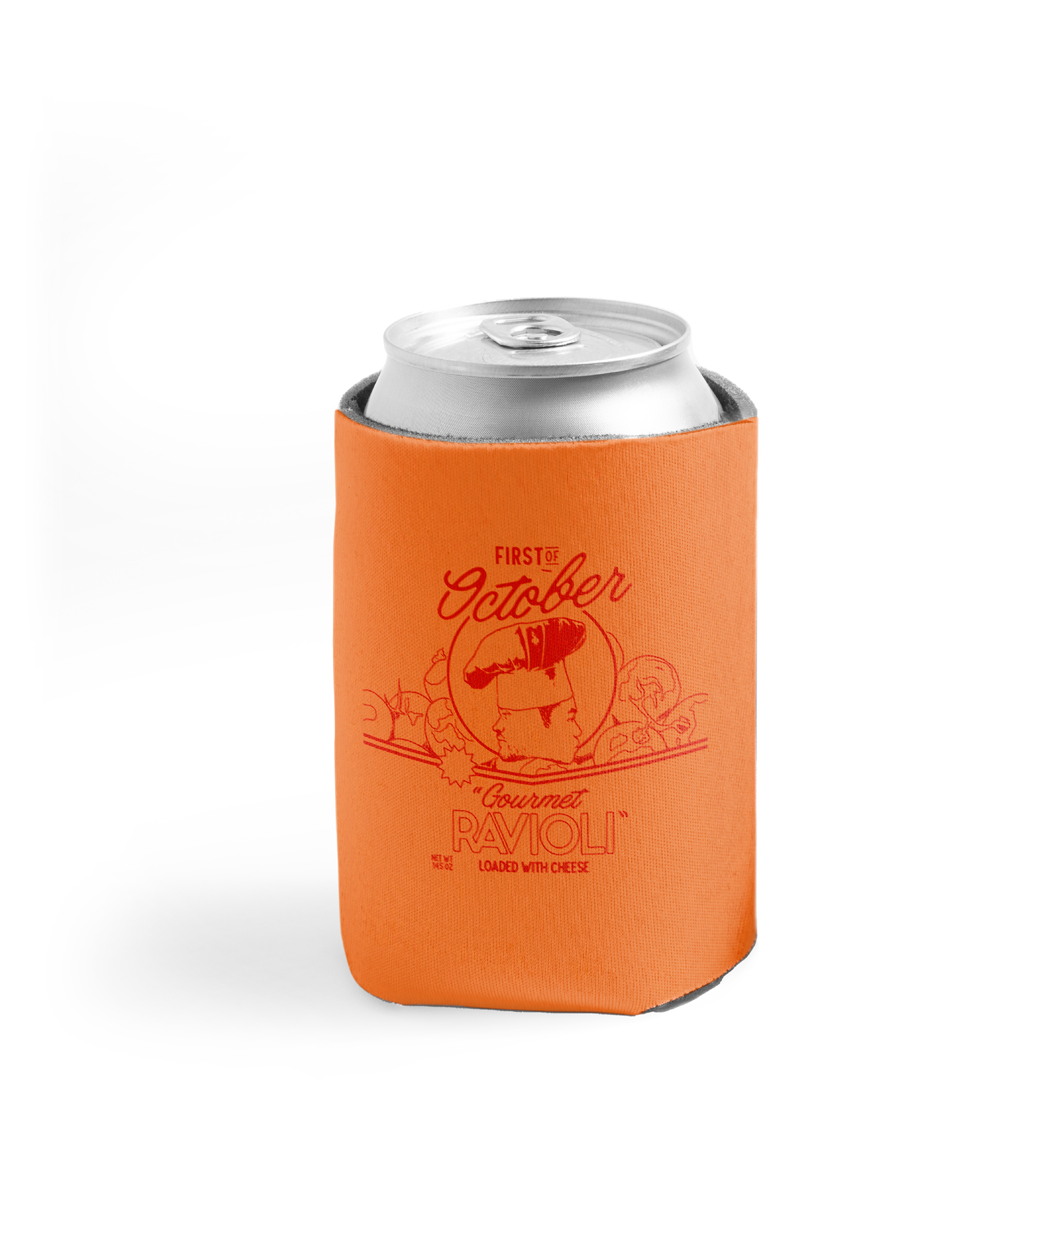 An orange koozie that says "First of October; Gourmet Ravioli Loaded with Cheese" with a 12oz can inside.